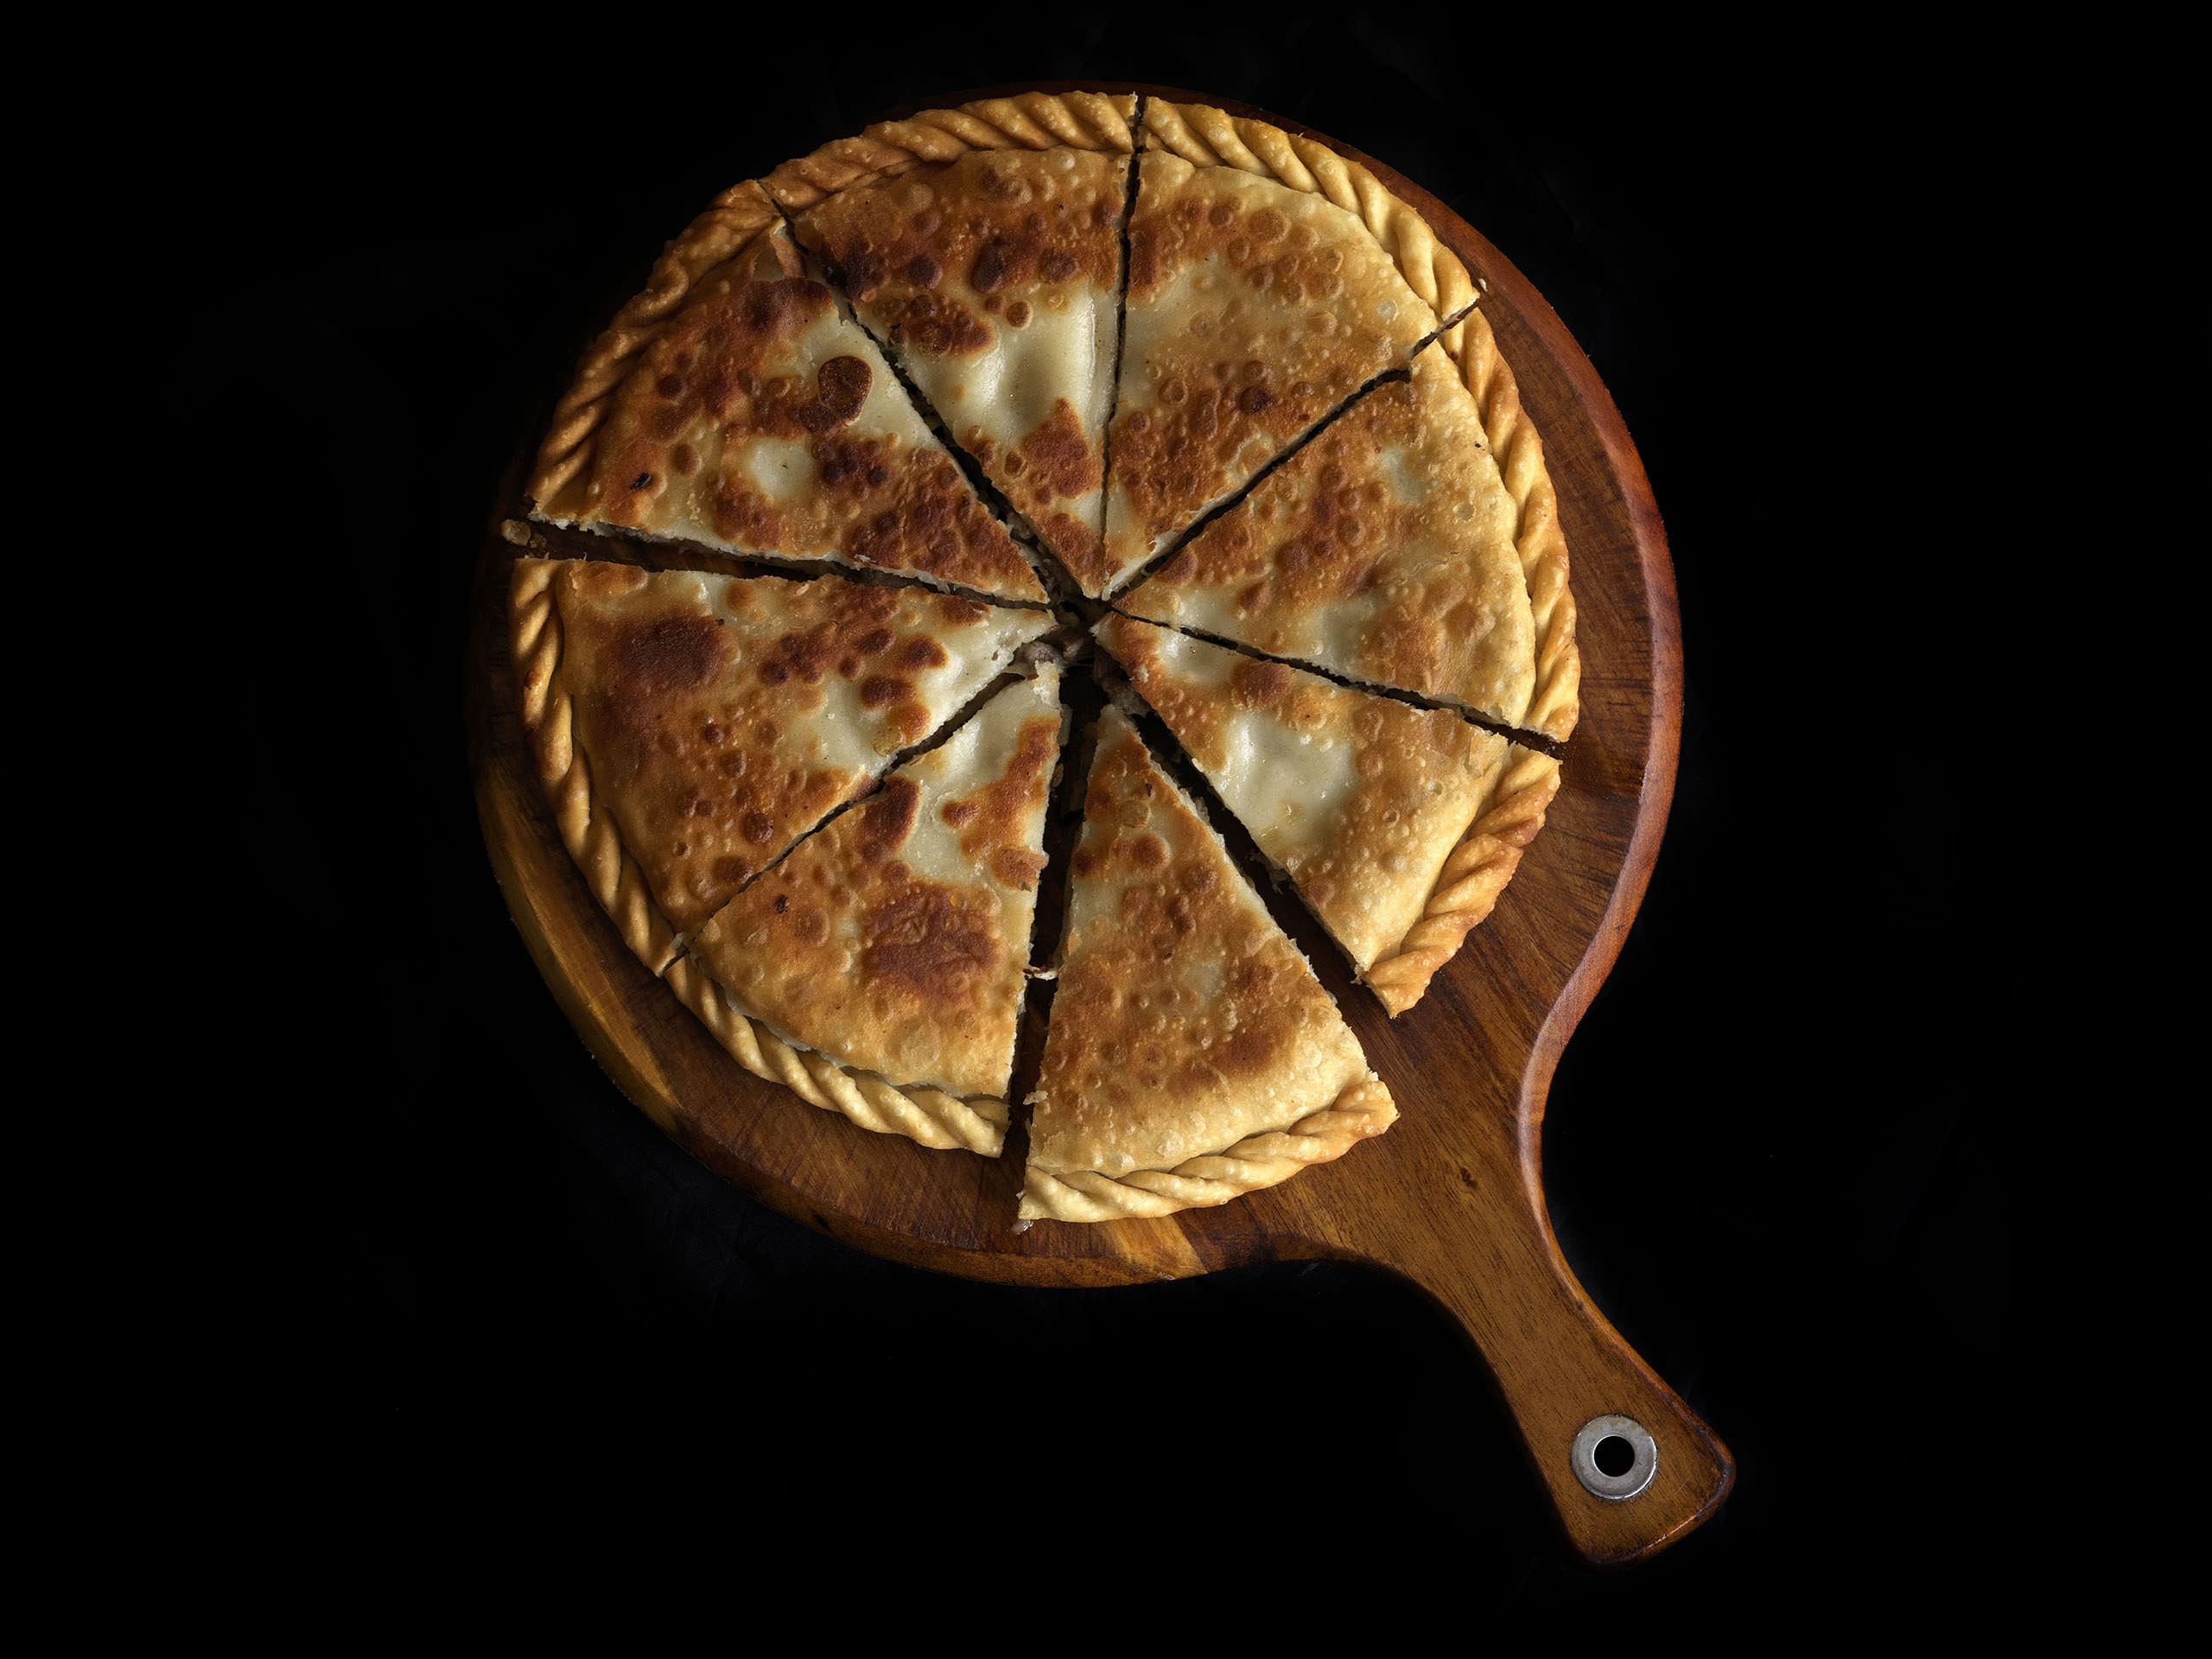 Goshan - Uyghur style meat pie with minced lamb and onion filling seasoned with cumin and a variety of peppers